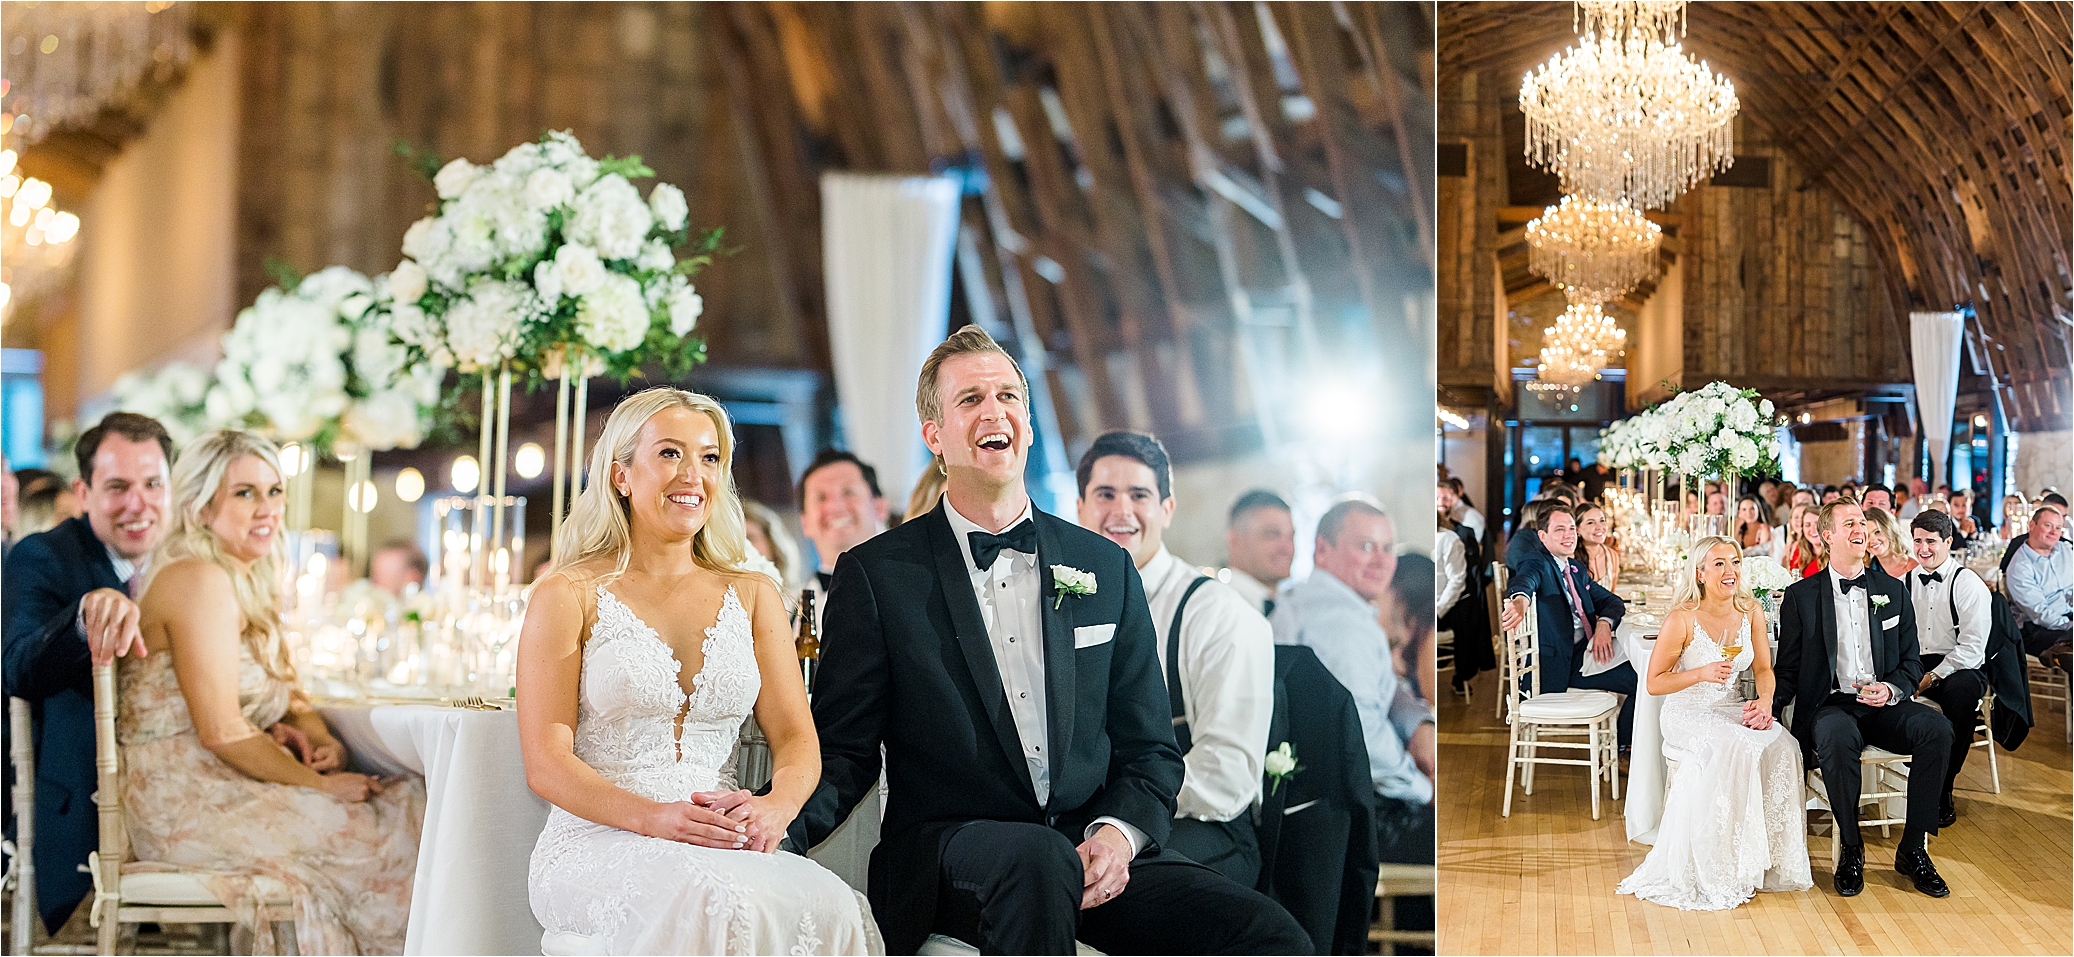 A bride and groom hold hands and smile during wedding speeches inside a brown barn decorated with candles and large white bouquets on their wedding day with Austin Wedding Photographer Jillian Hogan at Brodie Homestead in Austin, Texas.